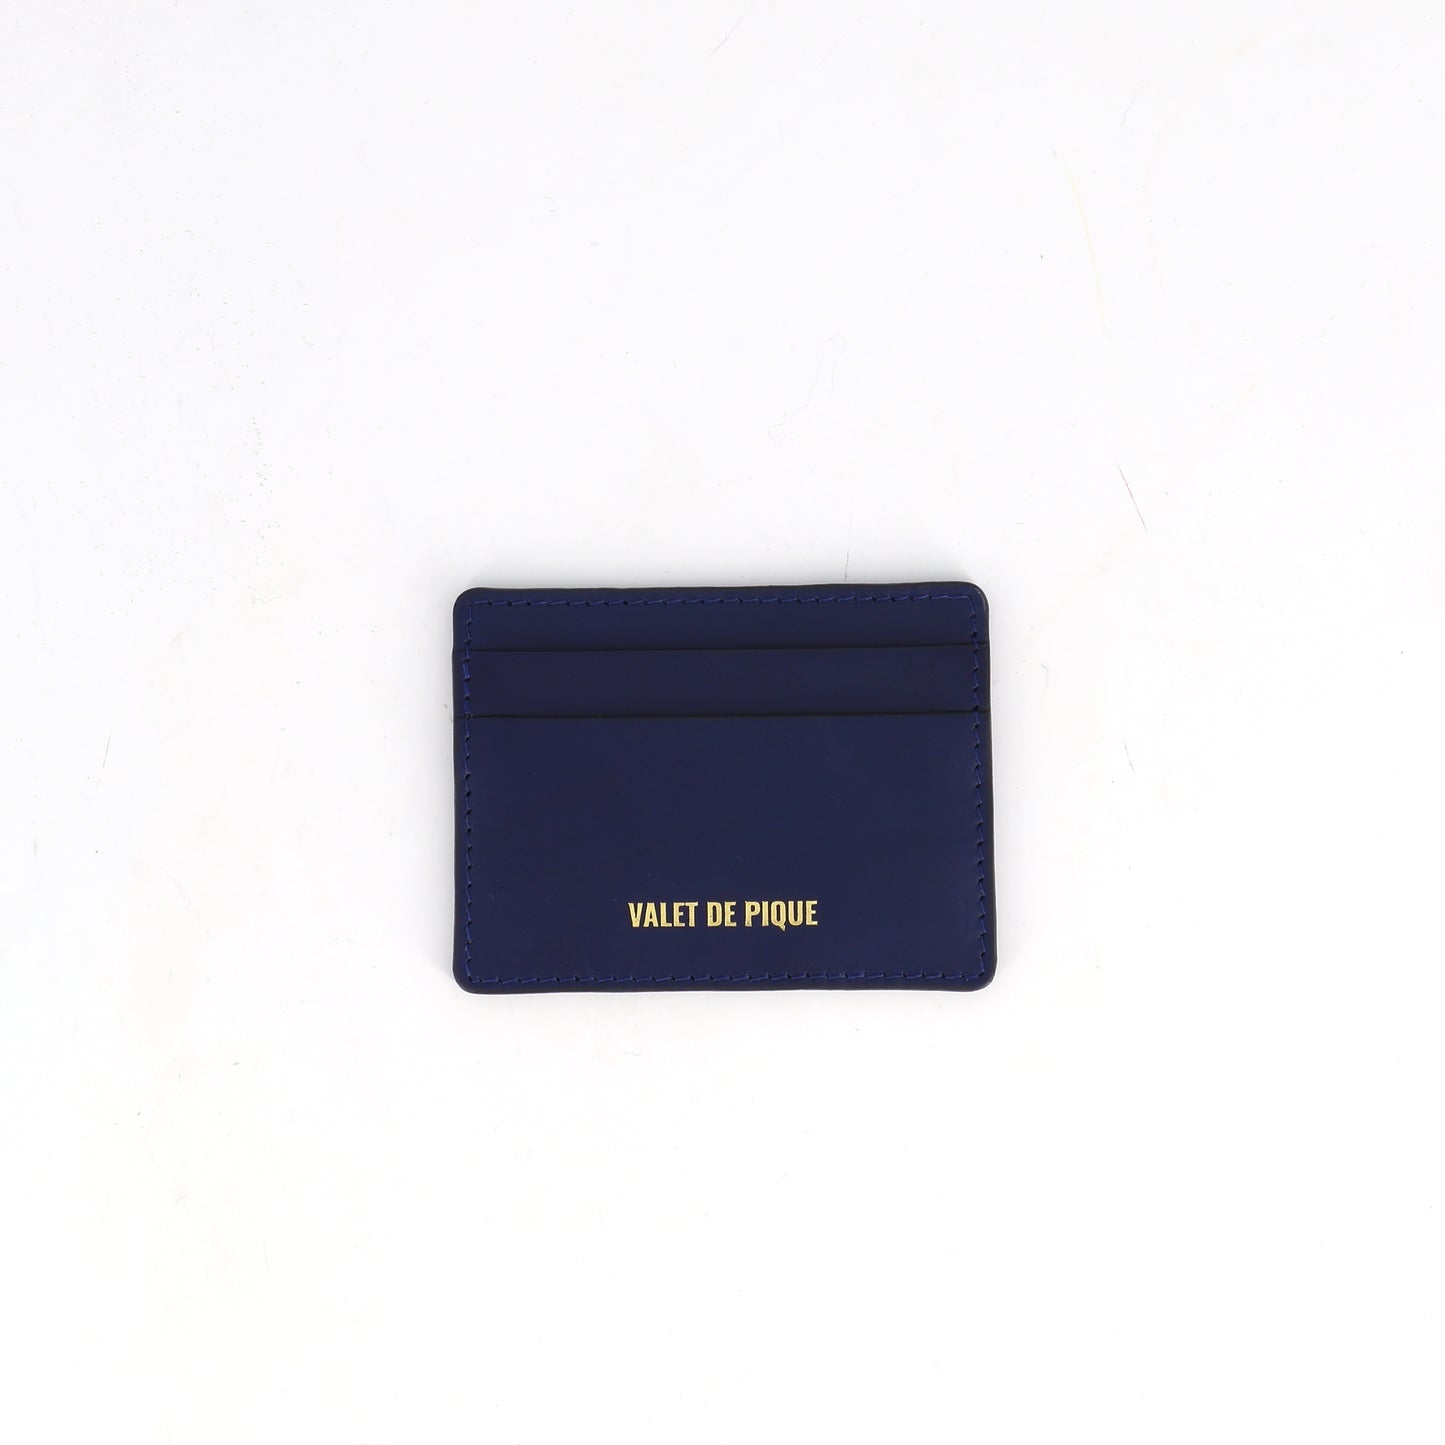 The Gustave card holder